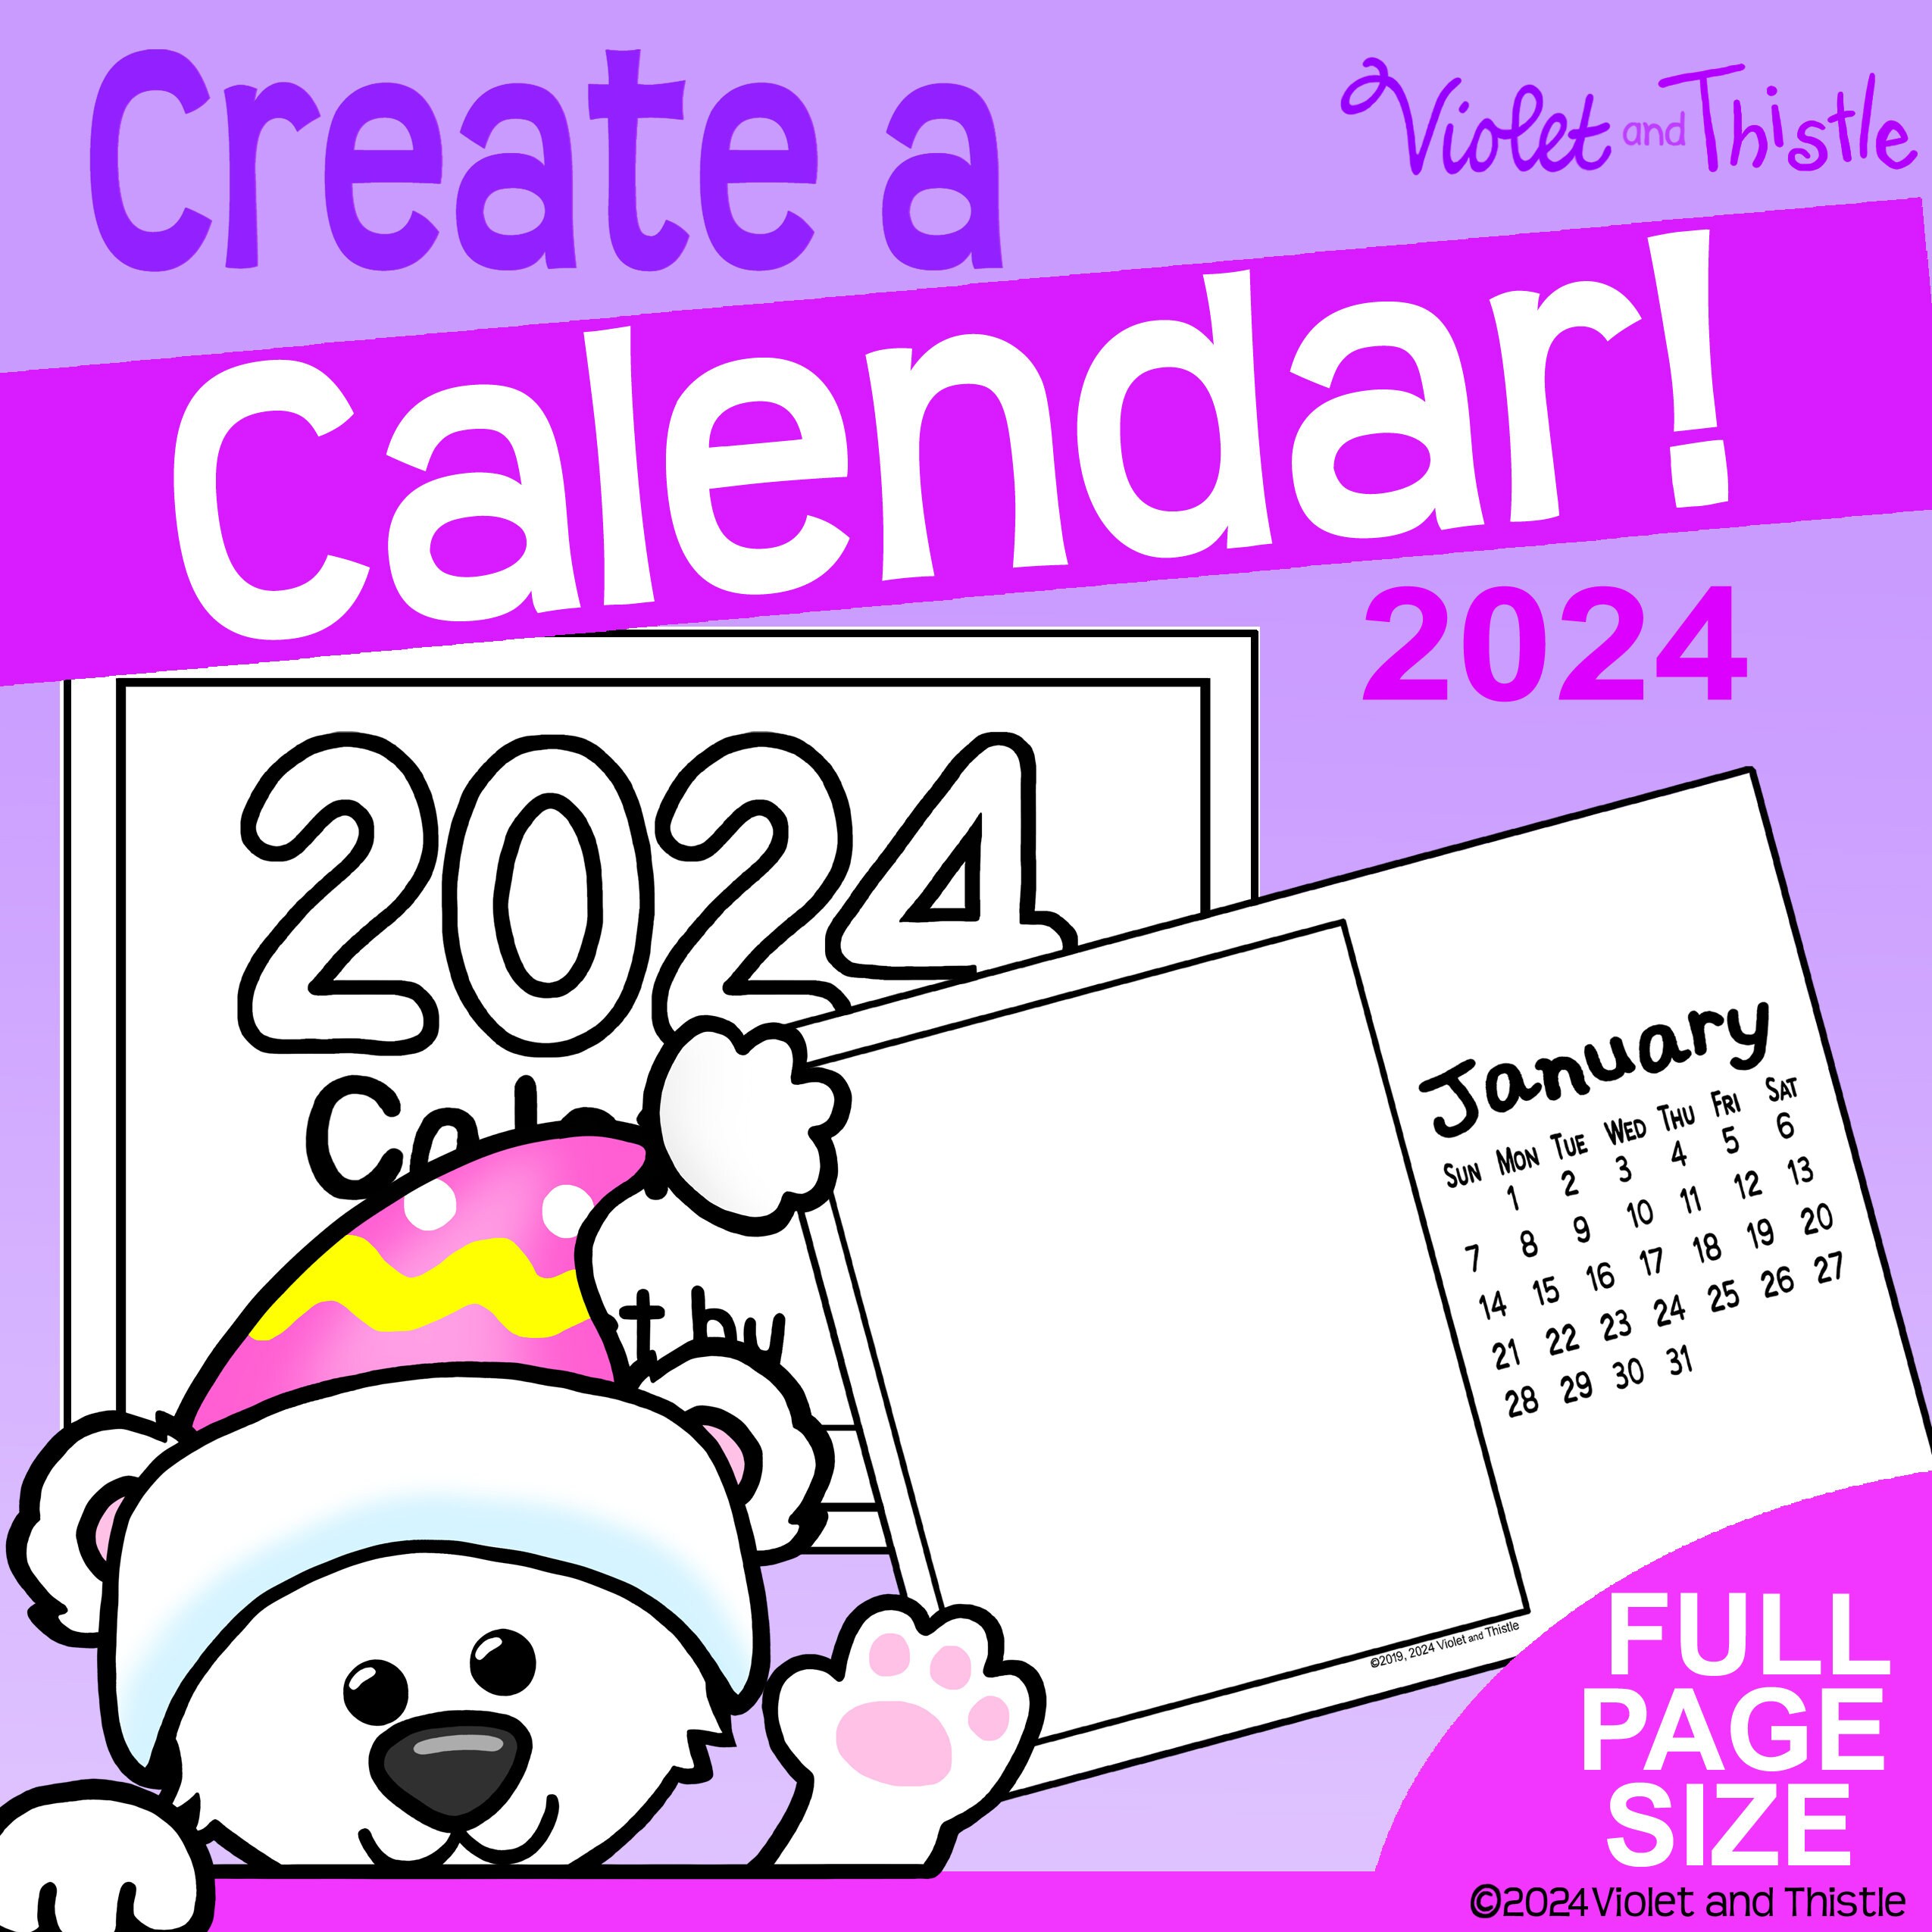 Calendrier GEO 2024 personnalisable